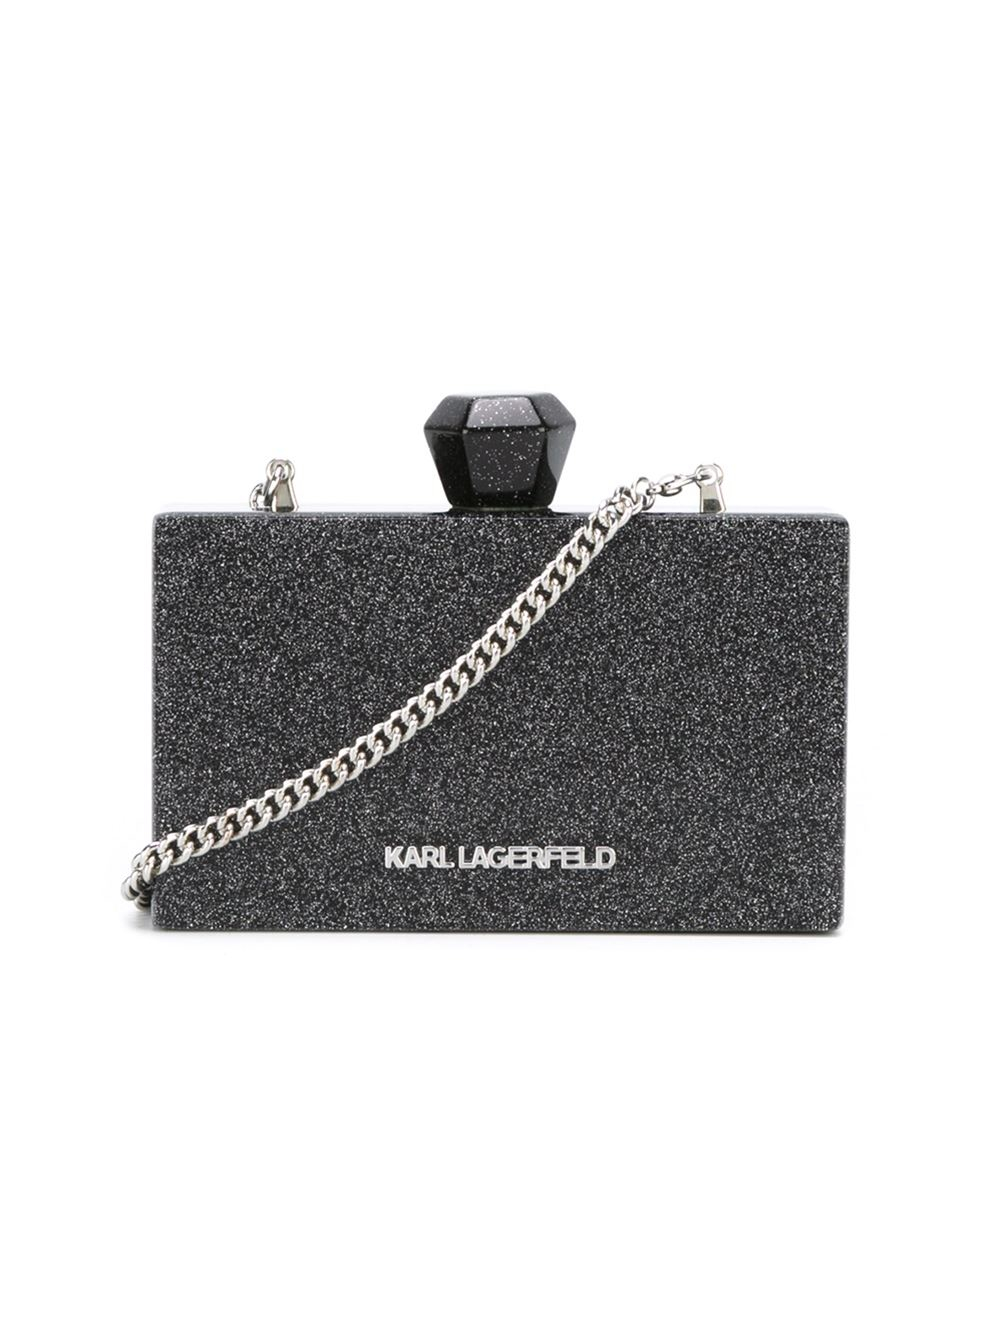 Karl Lagerfeld Wine Leather Evening Clutch Bag